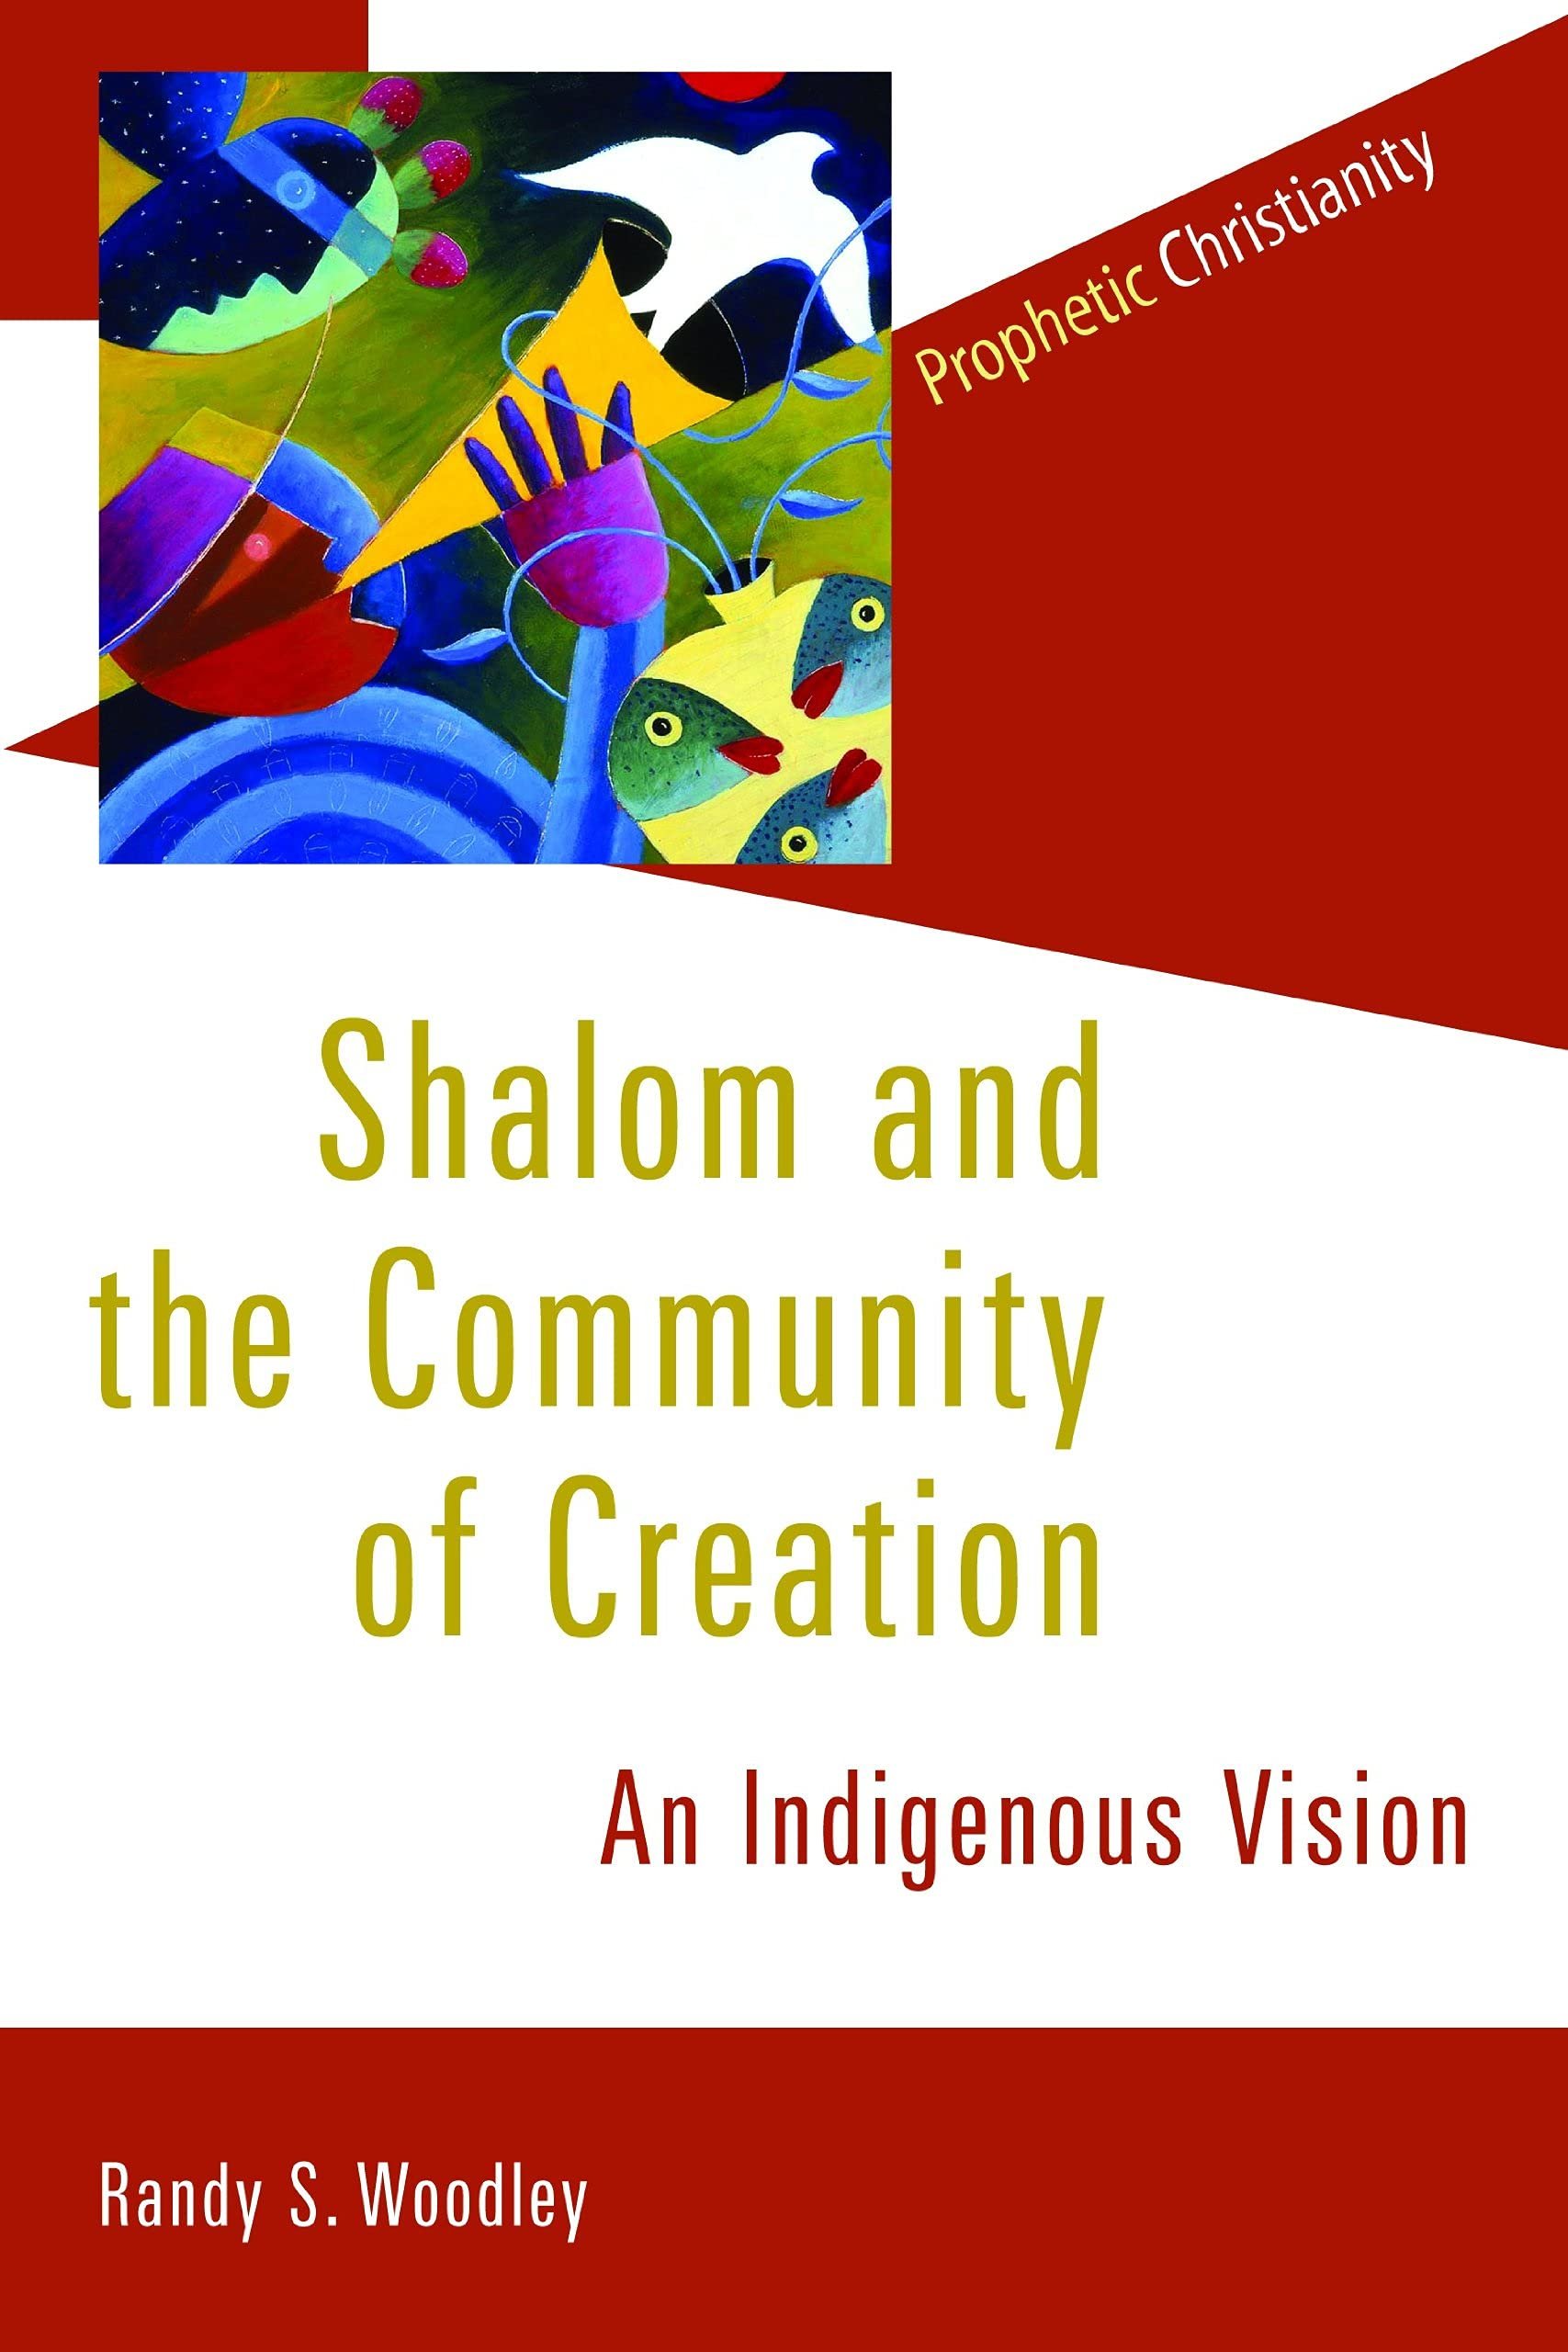  Woodley interweaves Indigenous thought and Christian theology to inform our understanding of shalom. He encourages us to think of shalom as a way of living and embodying peace within the communities and the created world around us. Woodley calls thi